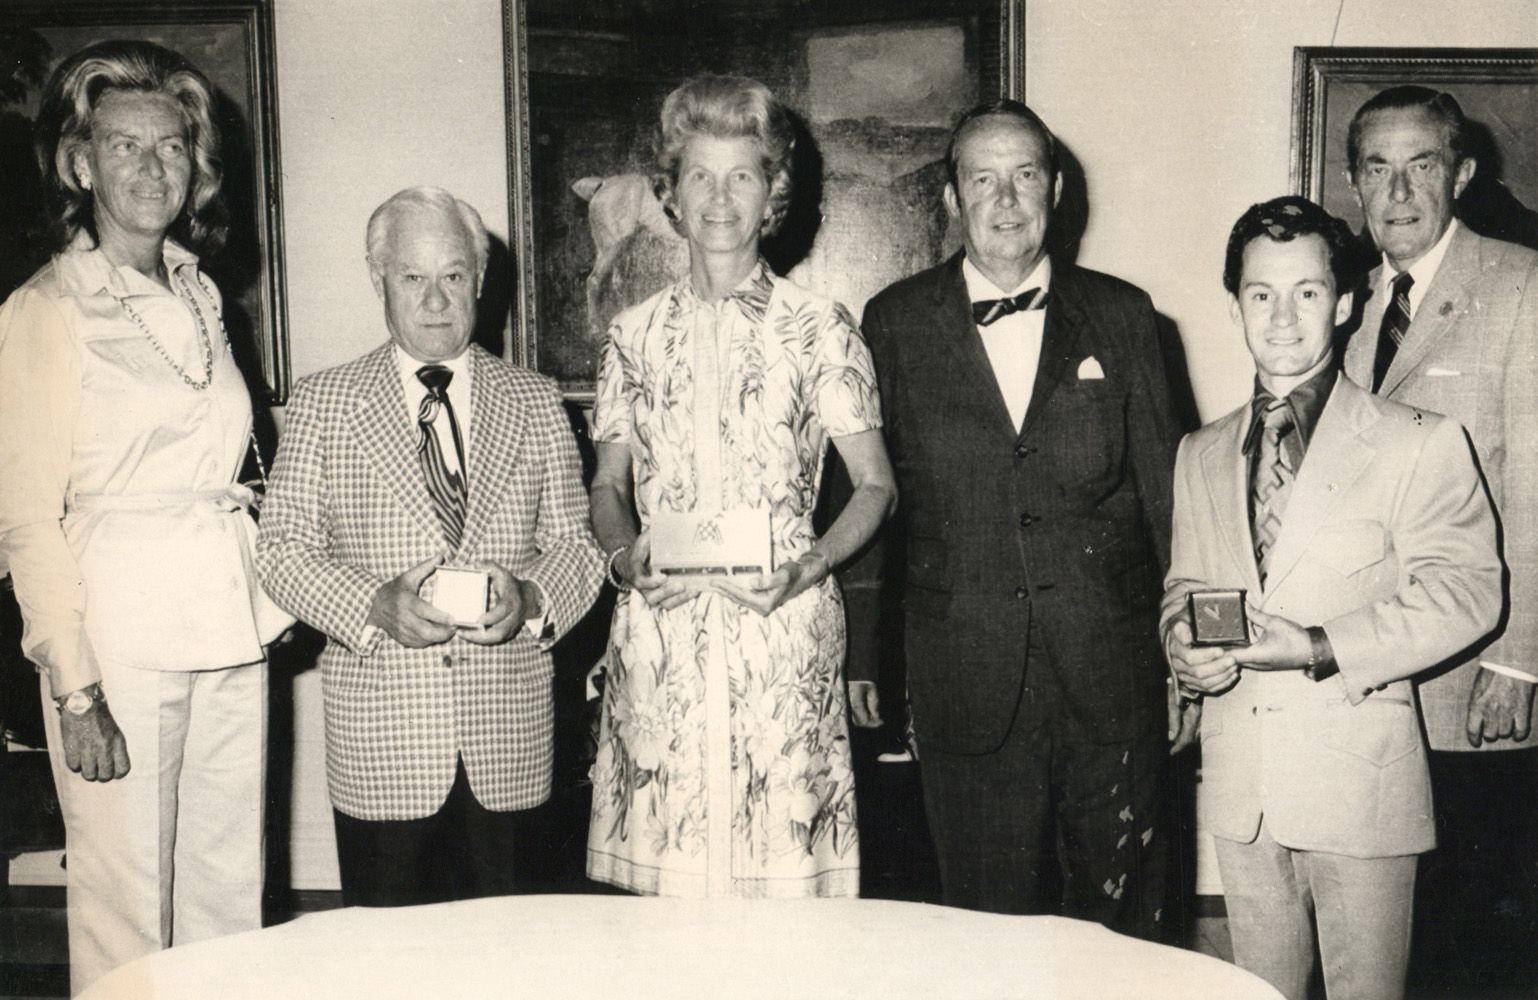 The winning connections of Secretariat Mr. and Mrs. Walter Jeffords of the Belmont Ball Committee and Charles E. Mather II, Museum President, at the National Museum of Racing in August 1974 (Bob Coglianese/Museum Collection)